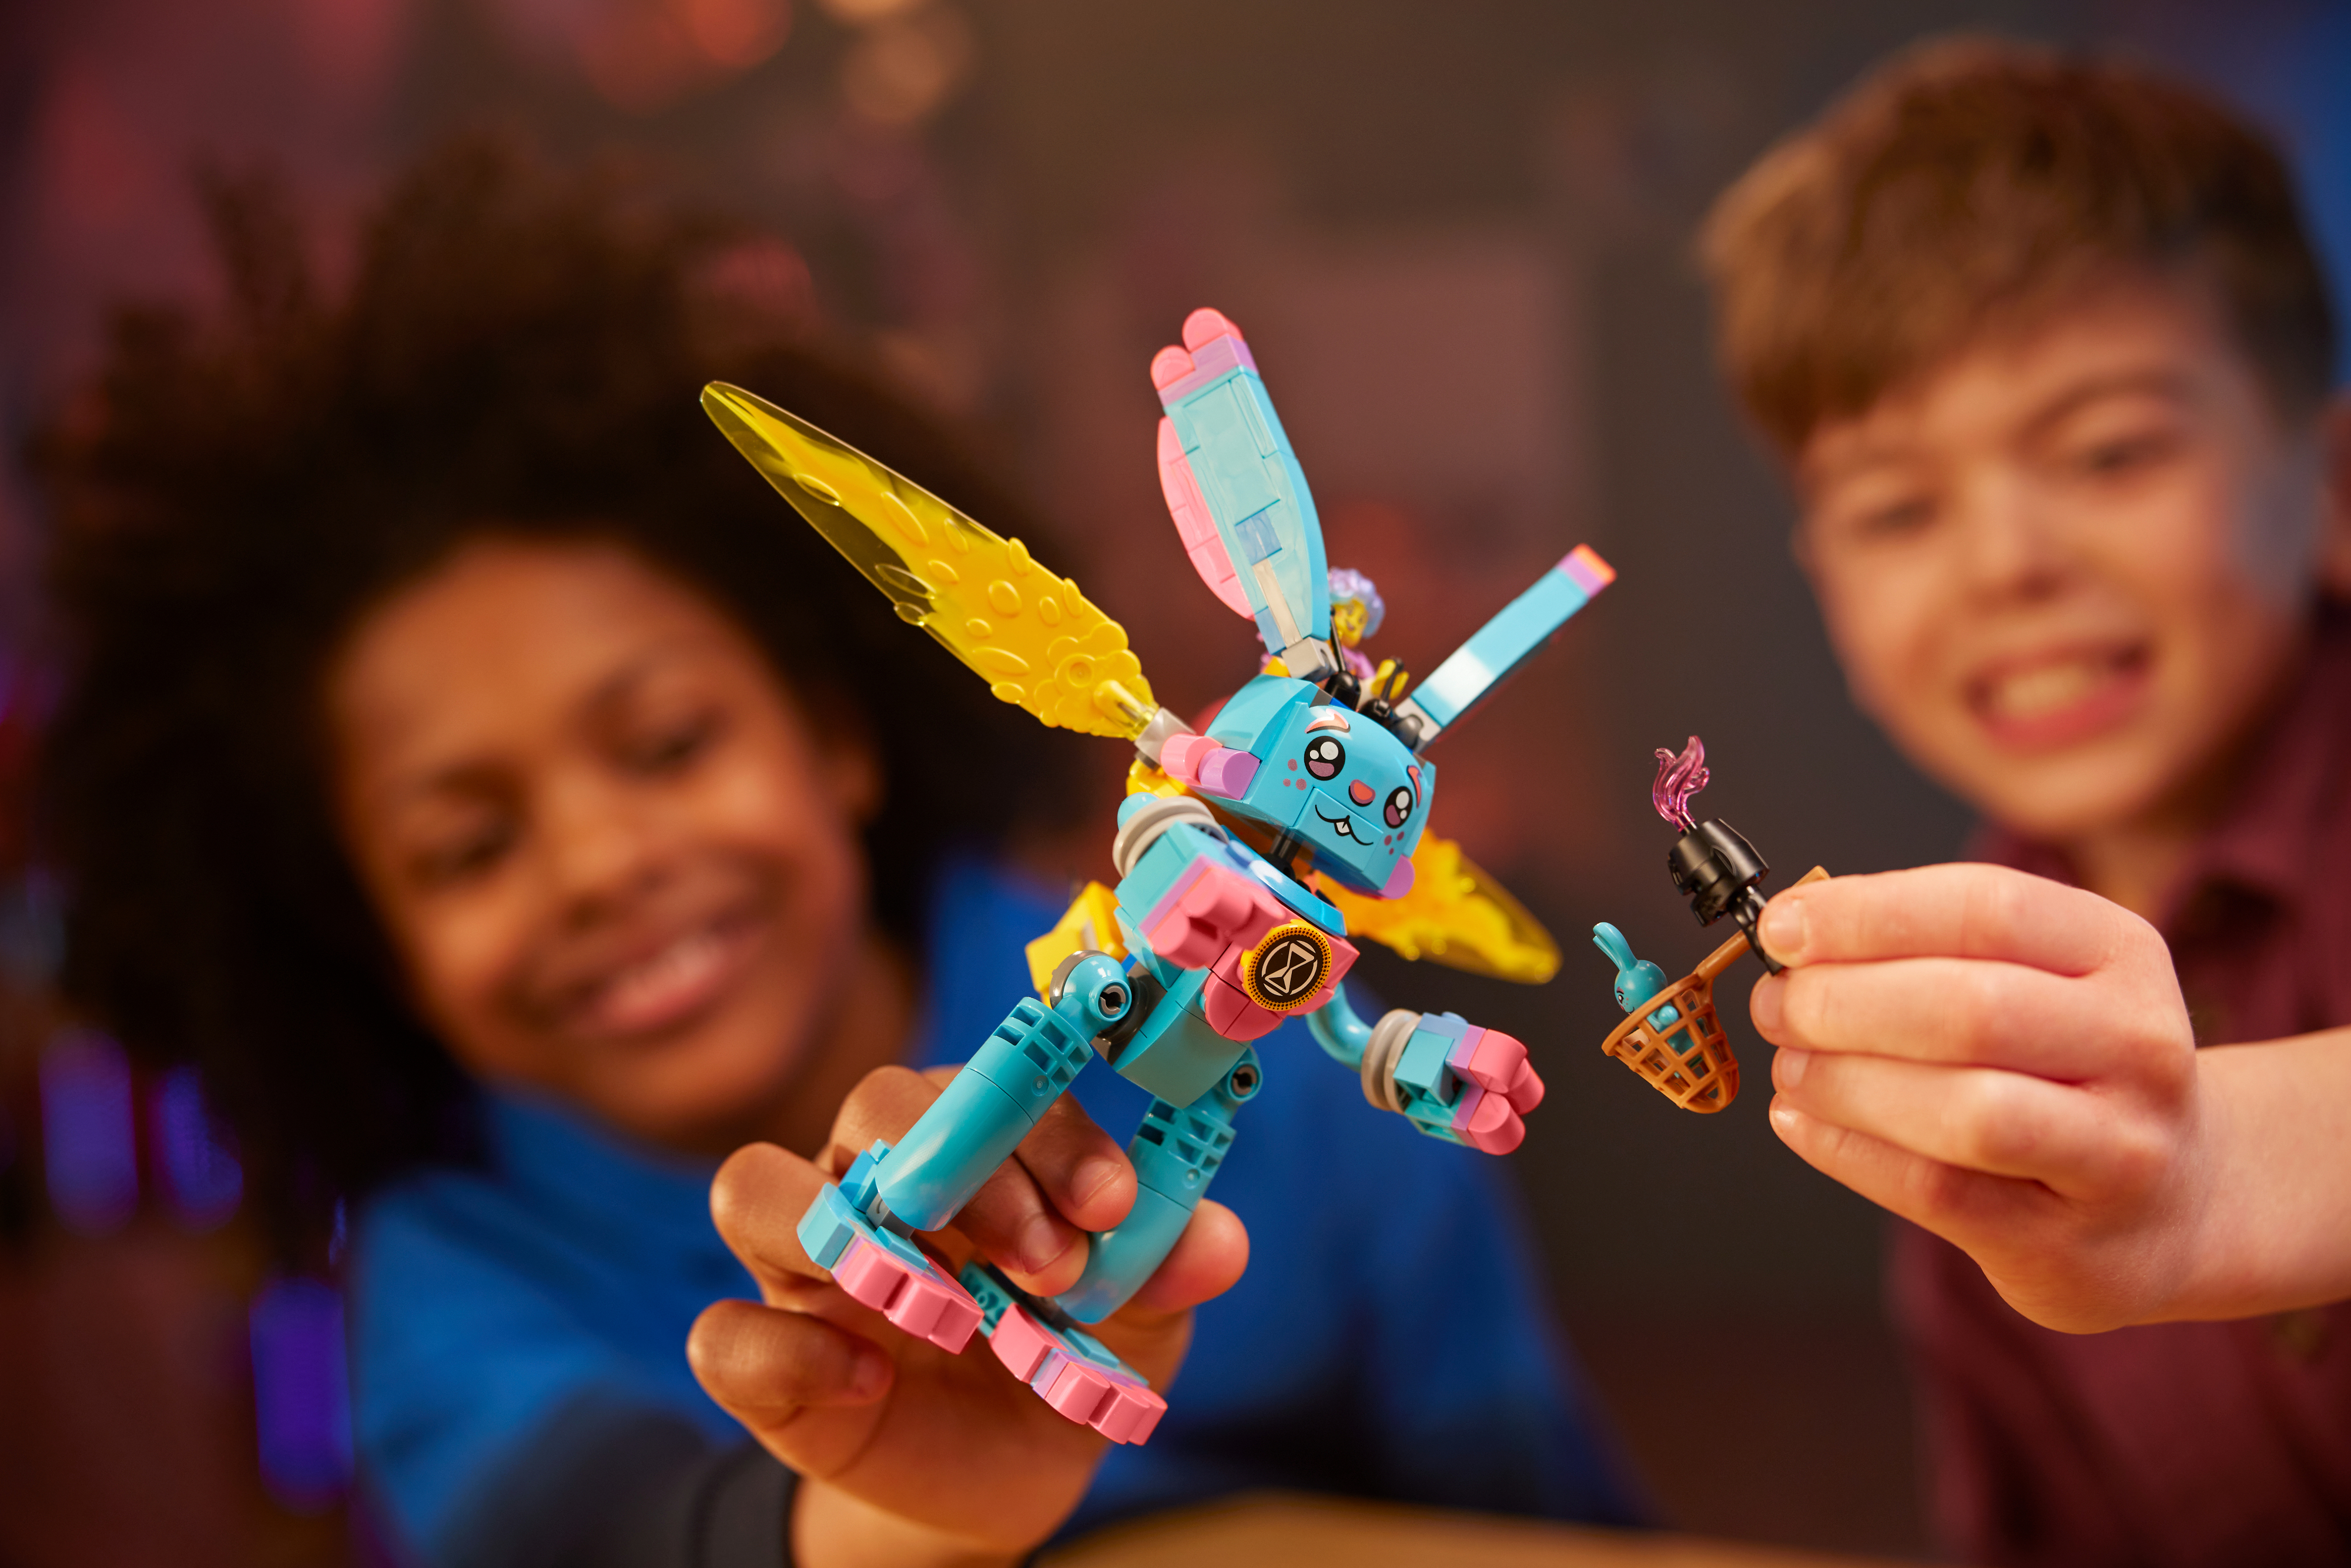 Two children smiling, one holding a colorful LEGO figure with wings